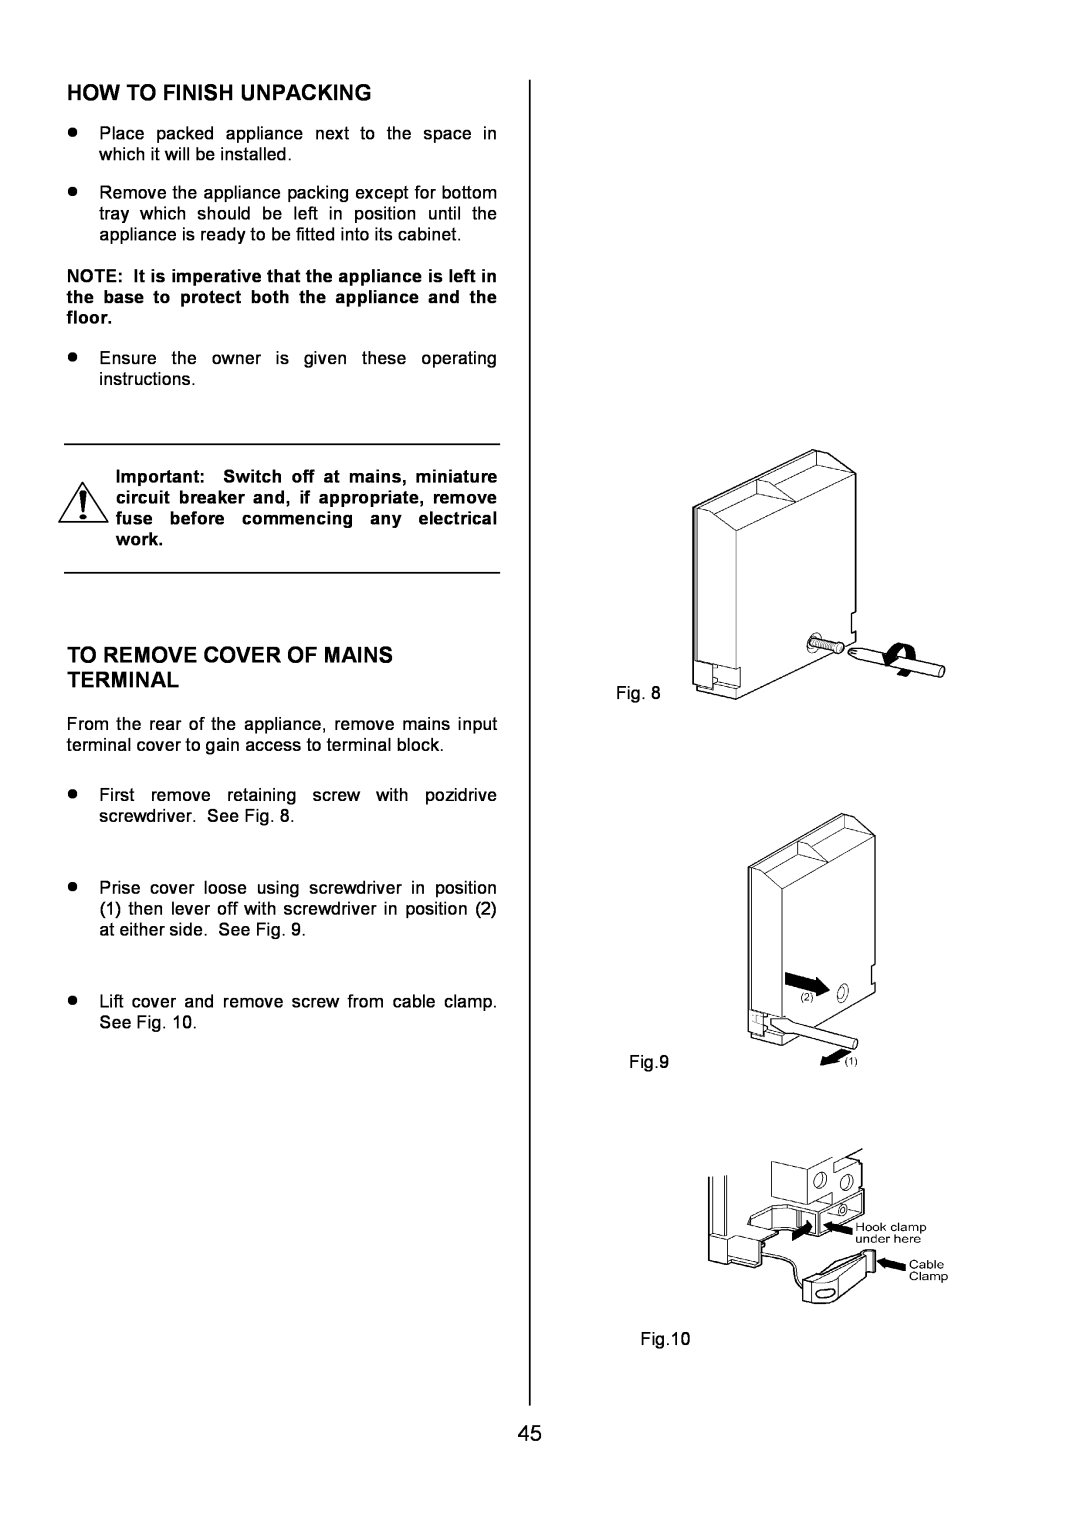 AEG 311704300, U7101-4 manual How To Finish Unpacking, To Remove Cover Of Mains Terminal 